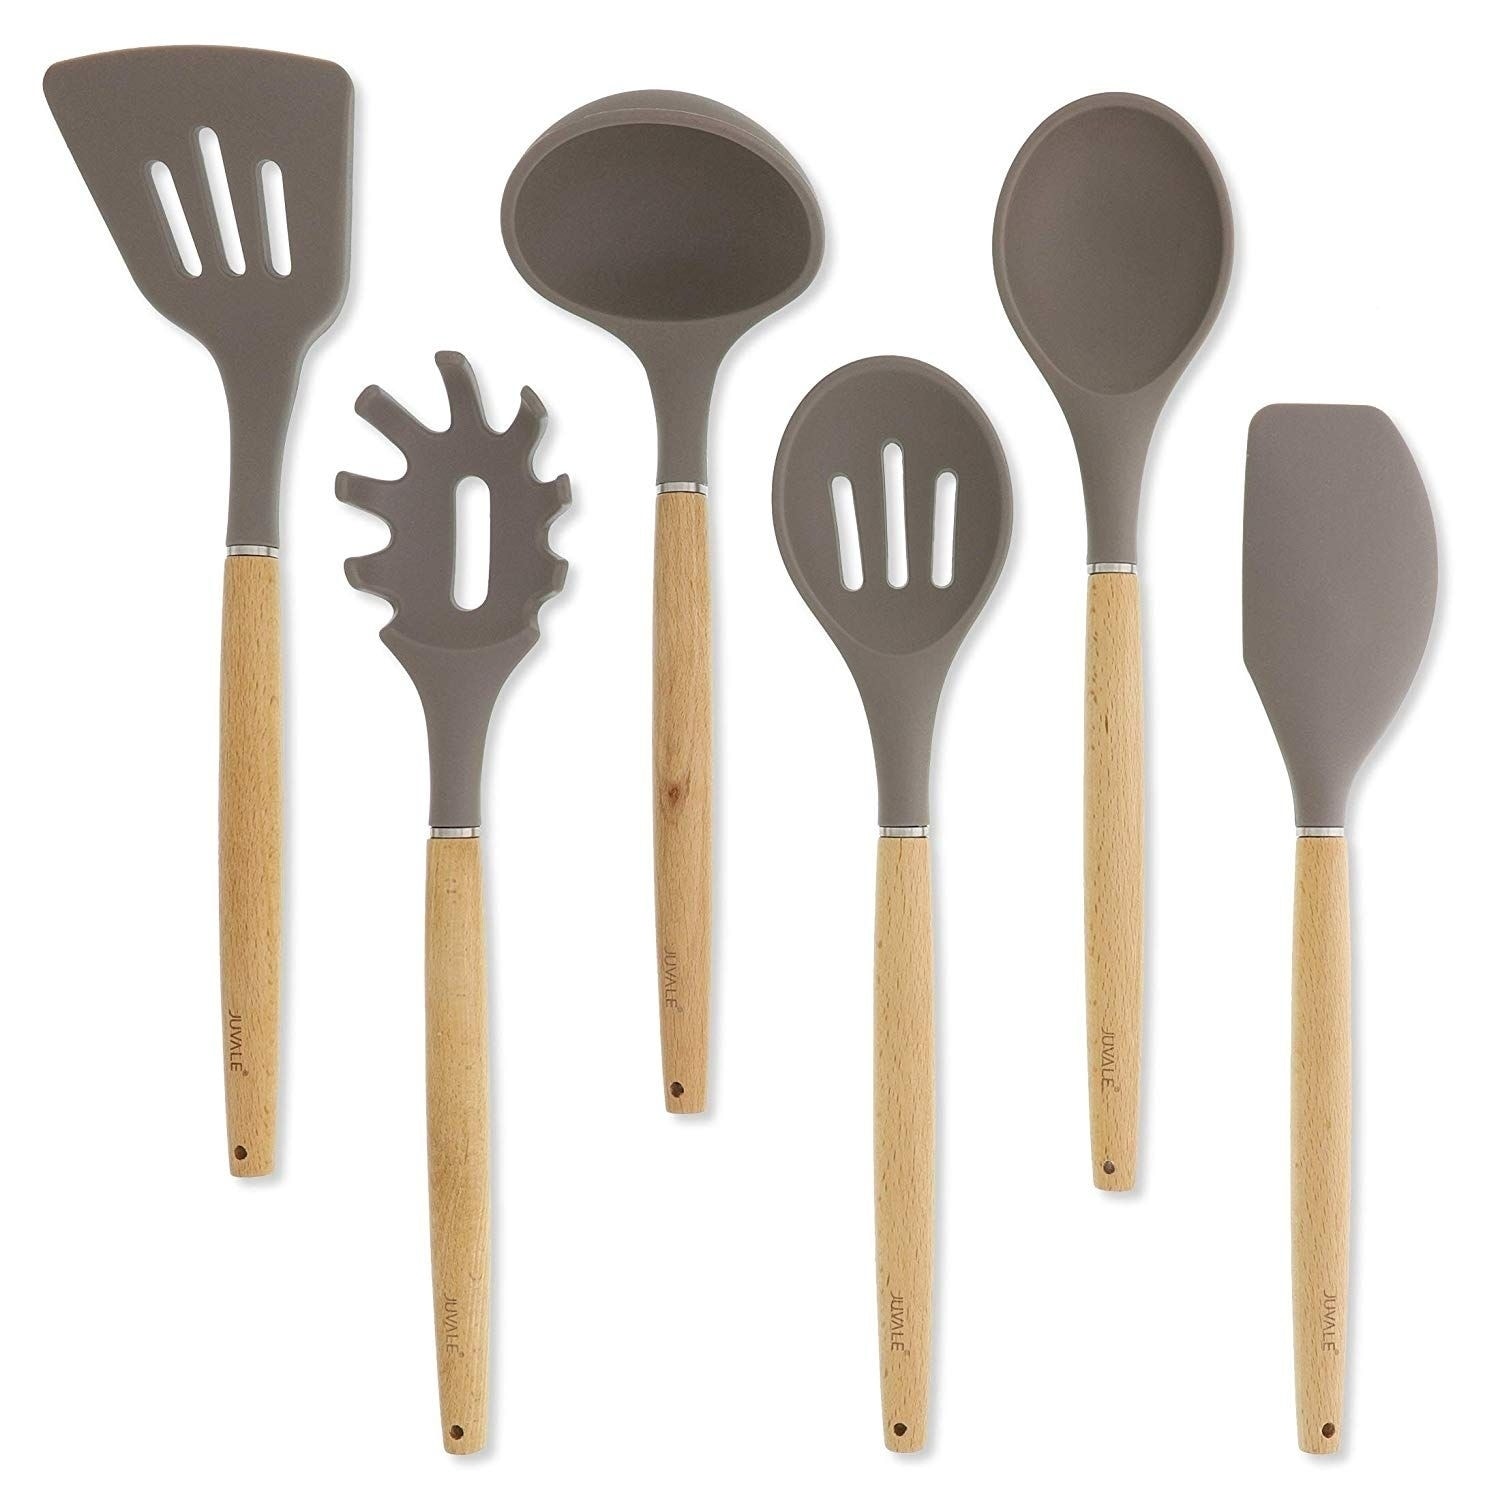 https://ak1.ostkcdn.com/images/products/29074068/Bamboo-Non-Stick-Silicone-Kitchen-Utensil-Cooking-Tools-7-Piece-Set-with-Holder-96de4c7f-ce7b-4252-b4db-1a150ec3a3ee.jpg